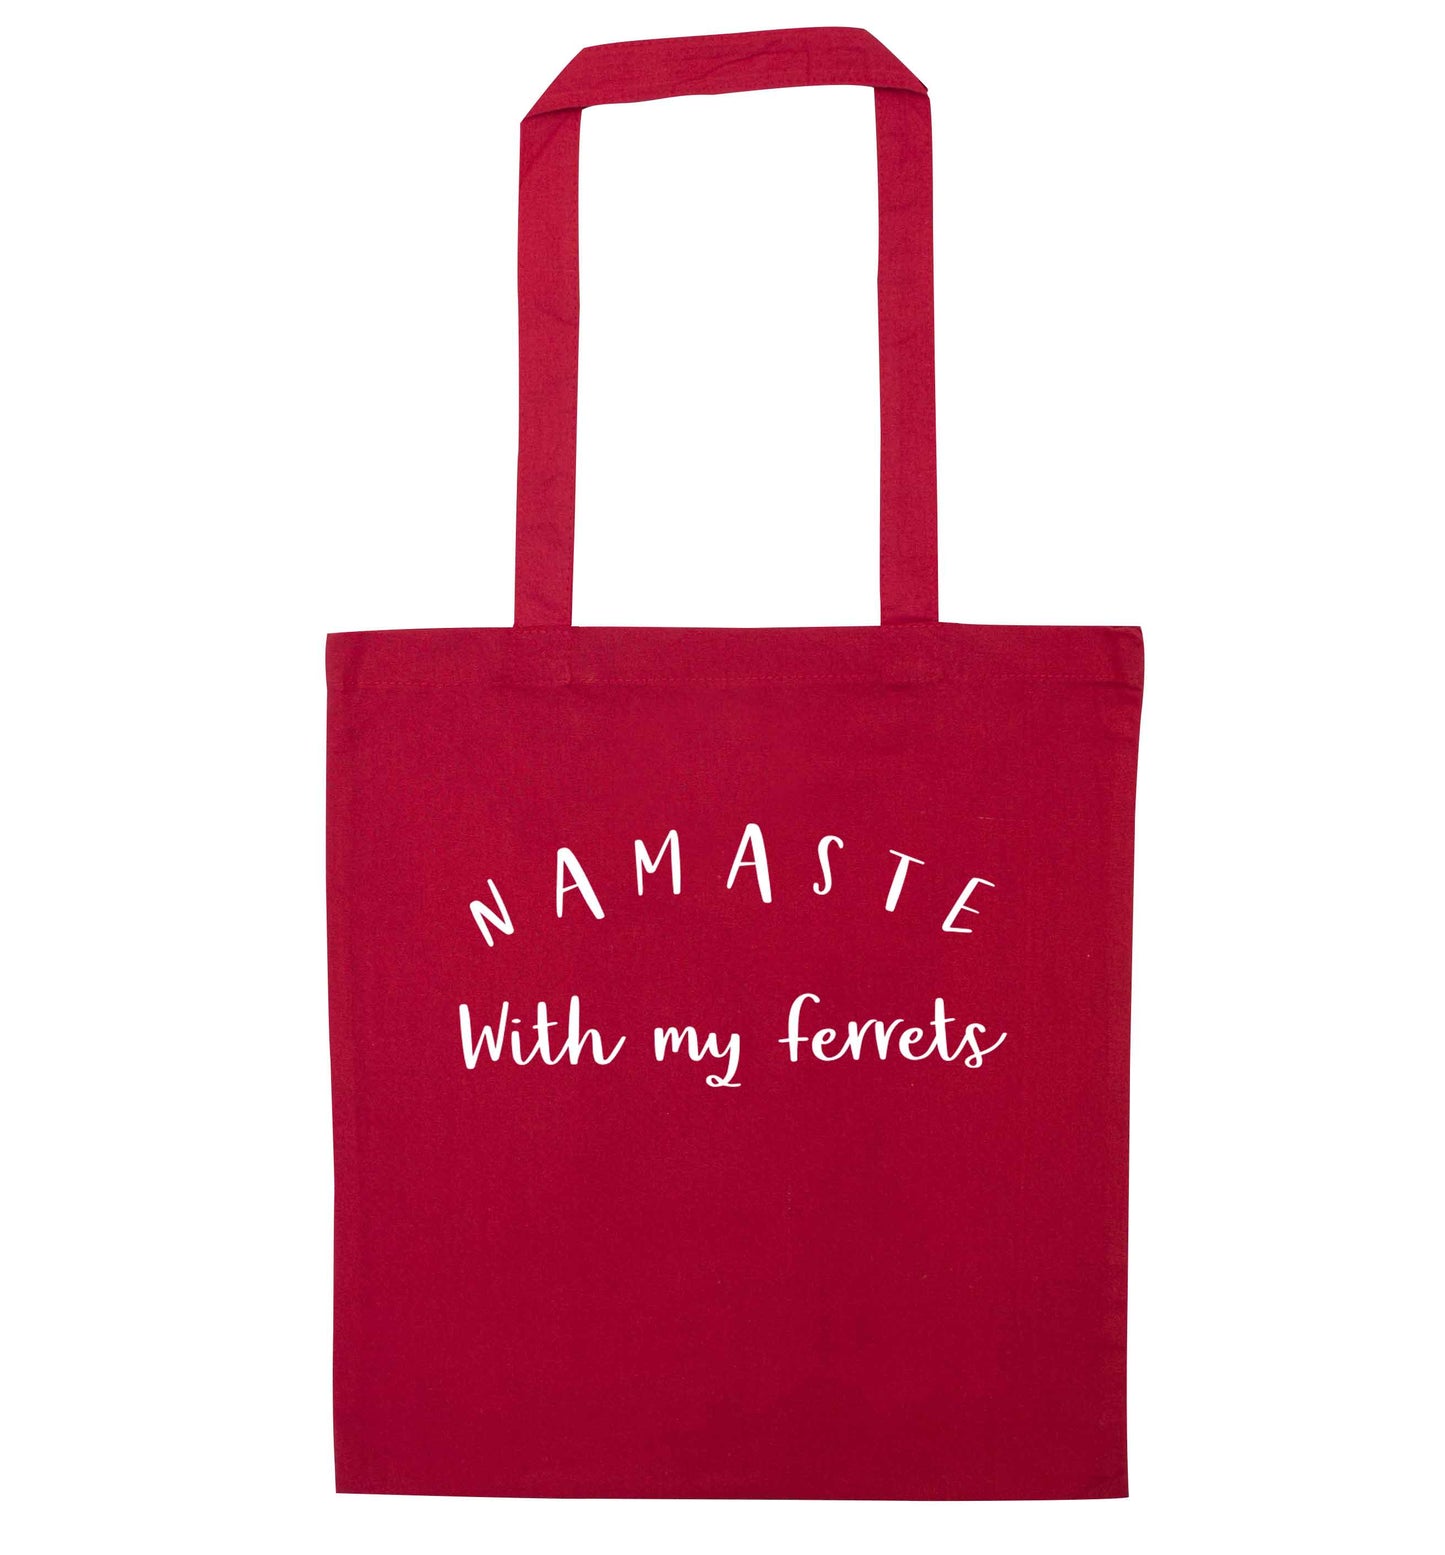 Namaste with my ferrets red tote bag